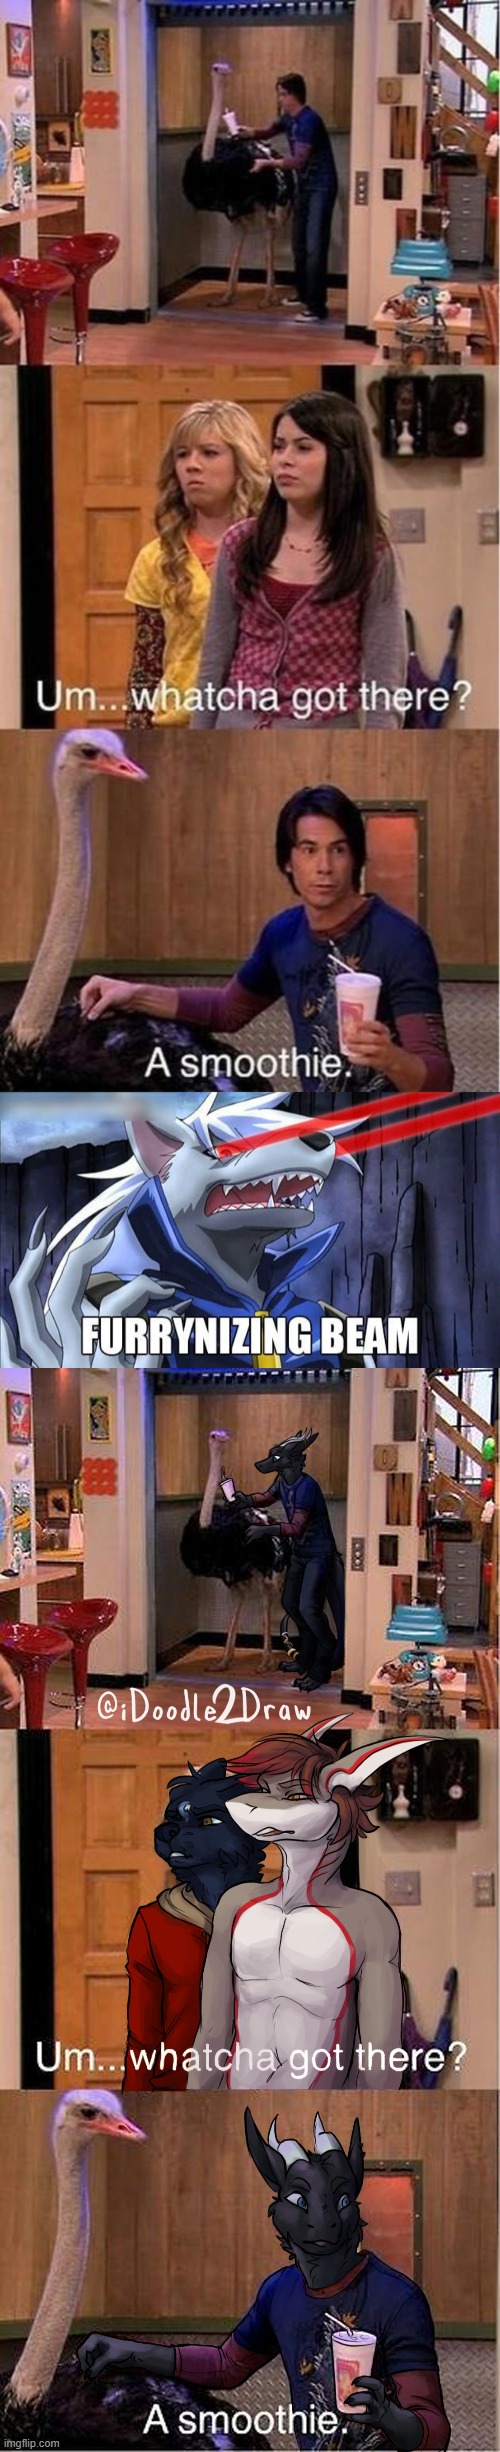 LONGEST FURRYNIZING BEAM MEME EVER! | image tagged in um watcha got there a smoothie,furrynizing beam,a smoothie,memes,funny,furry | made w/ Imgflip meme maker